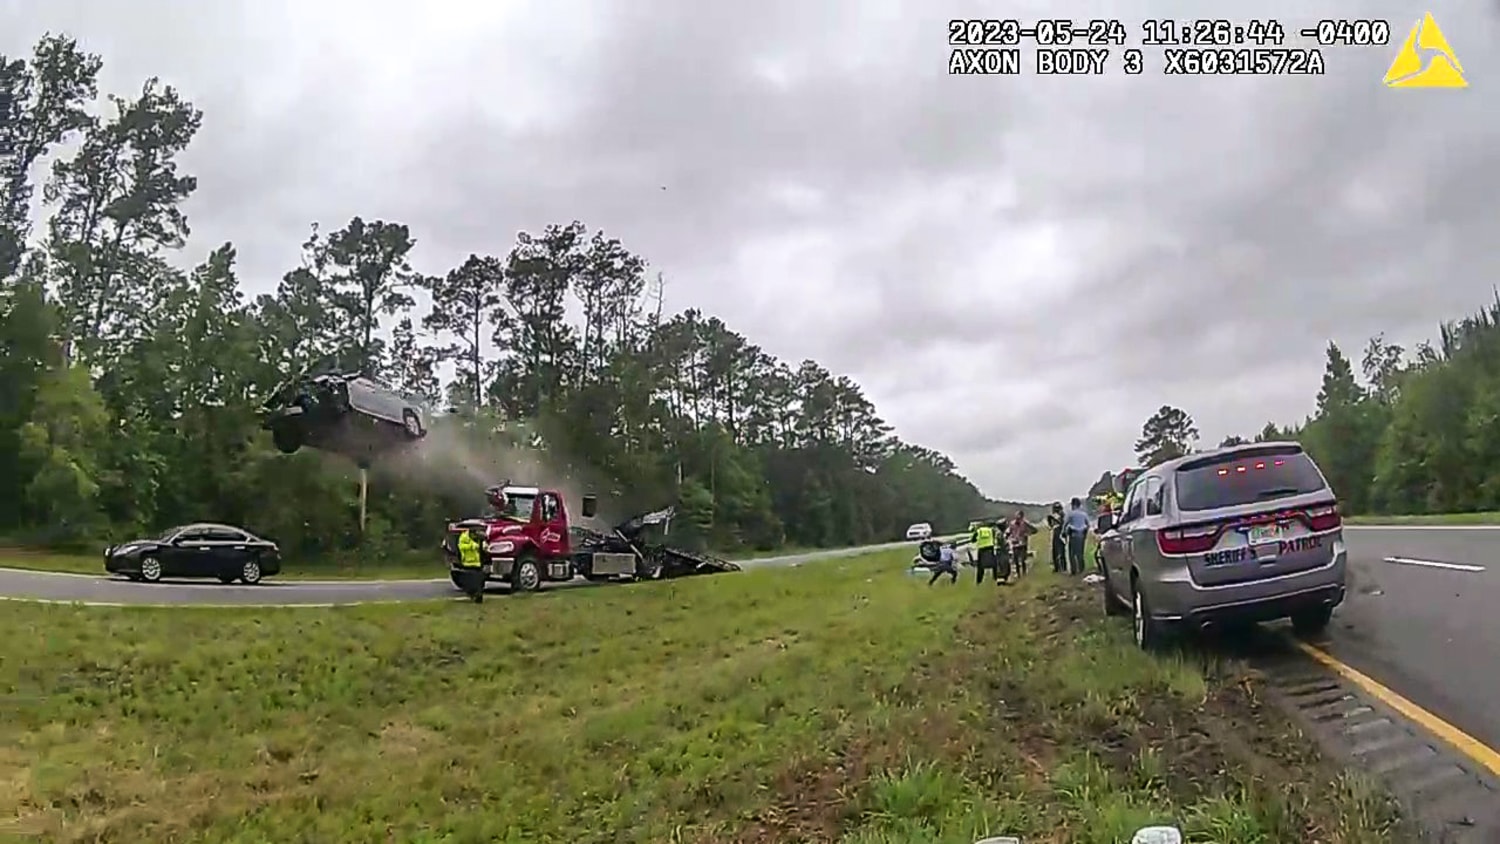 Video captures moments before car splits in half, critically injuring  driver 